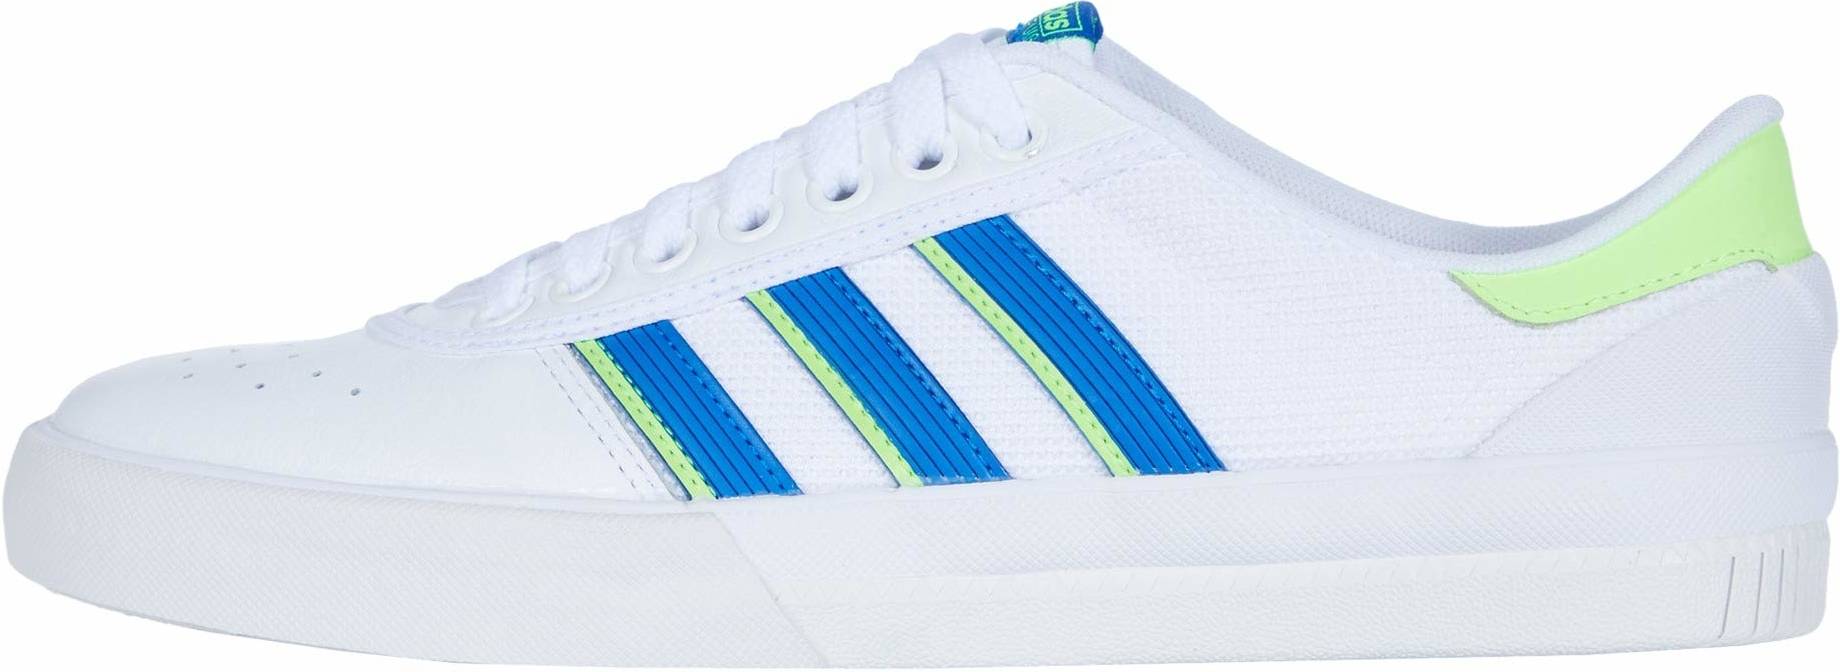 personalidad Ciro Tratamiento Preferencial adidas larnaca ermou airport flights to miami ohio sneakers in 3 colors  (only £40) | Infrastructure-intelligenceShops | adidas instagram influencer  scam email number